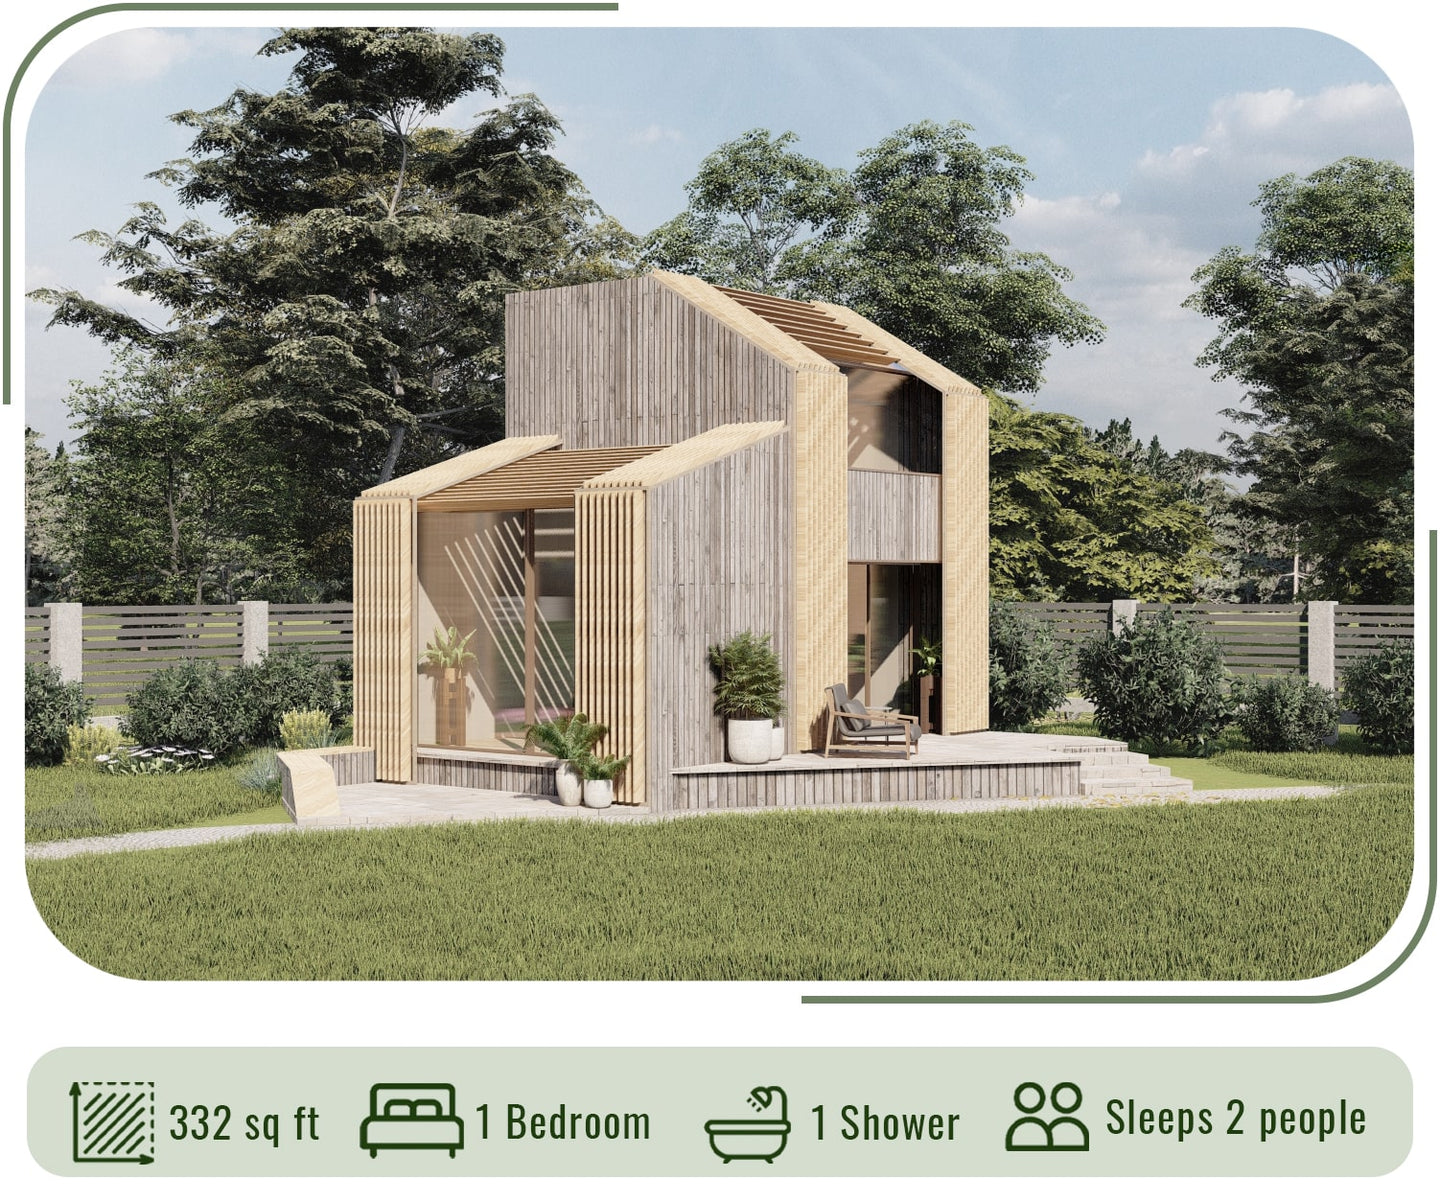 Sit+Us Cabin - Your Own Nature Retreat